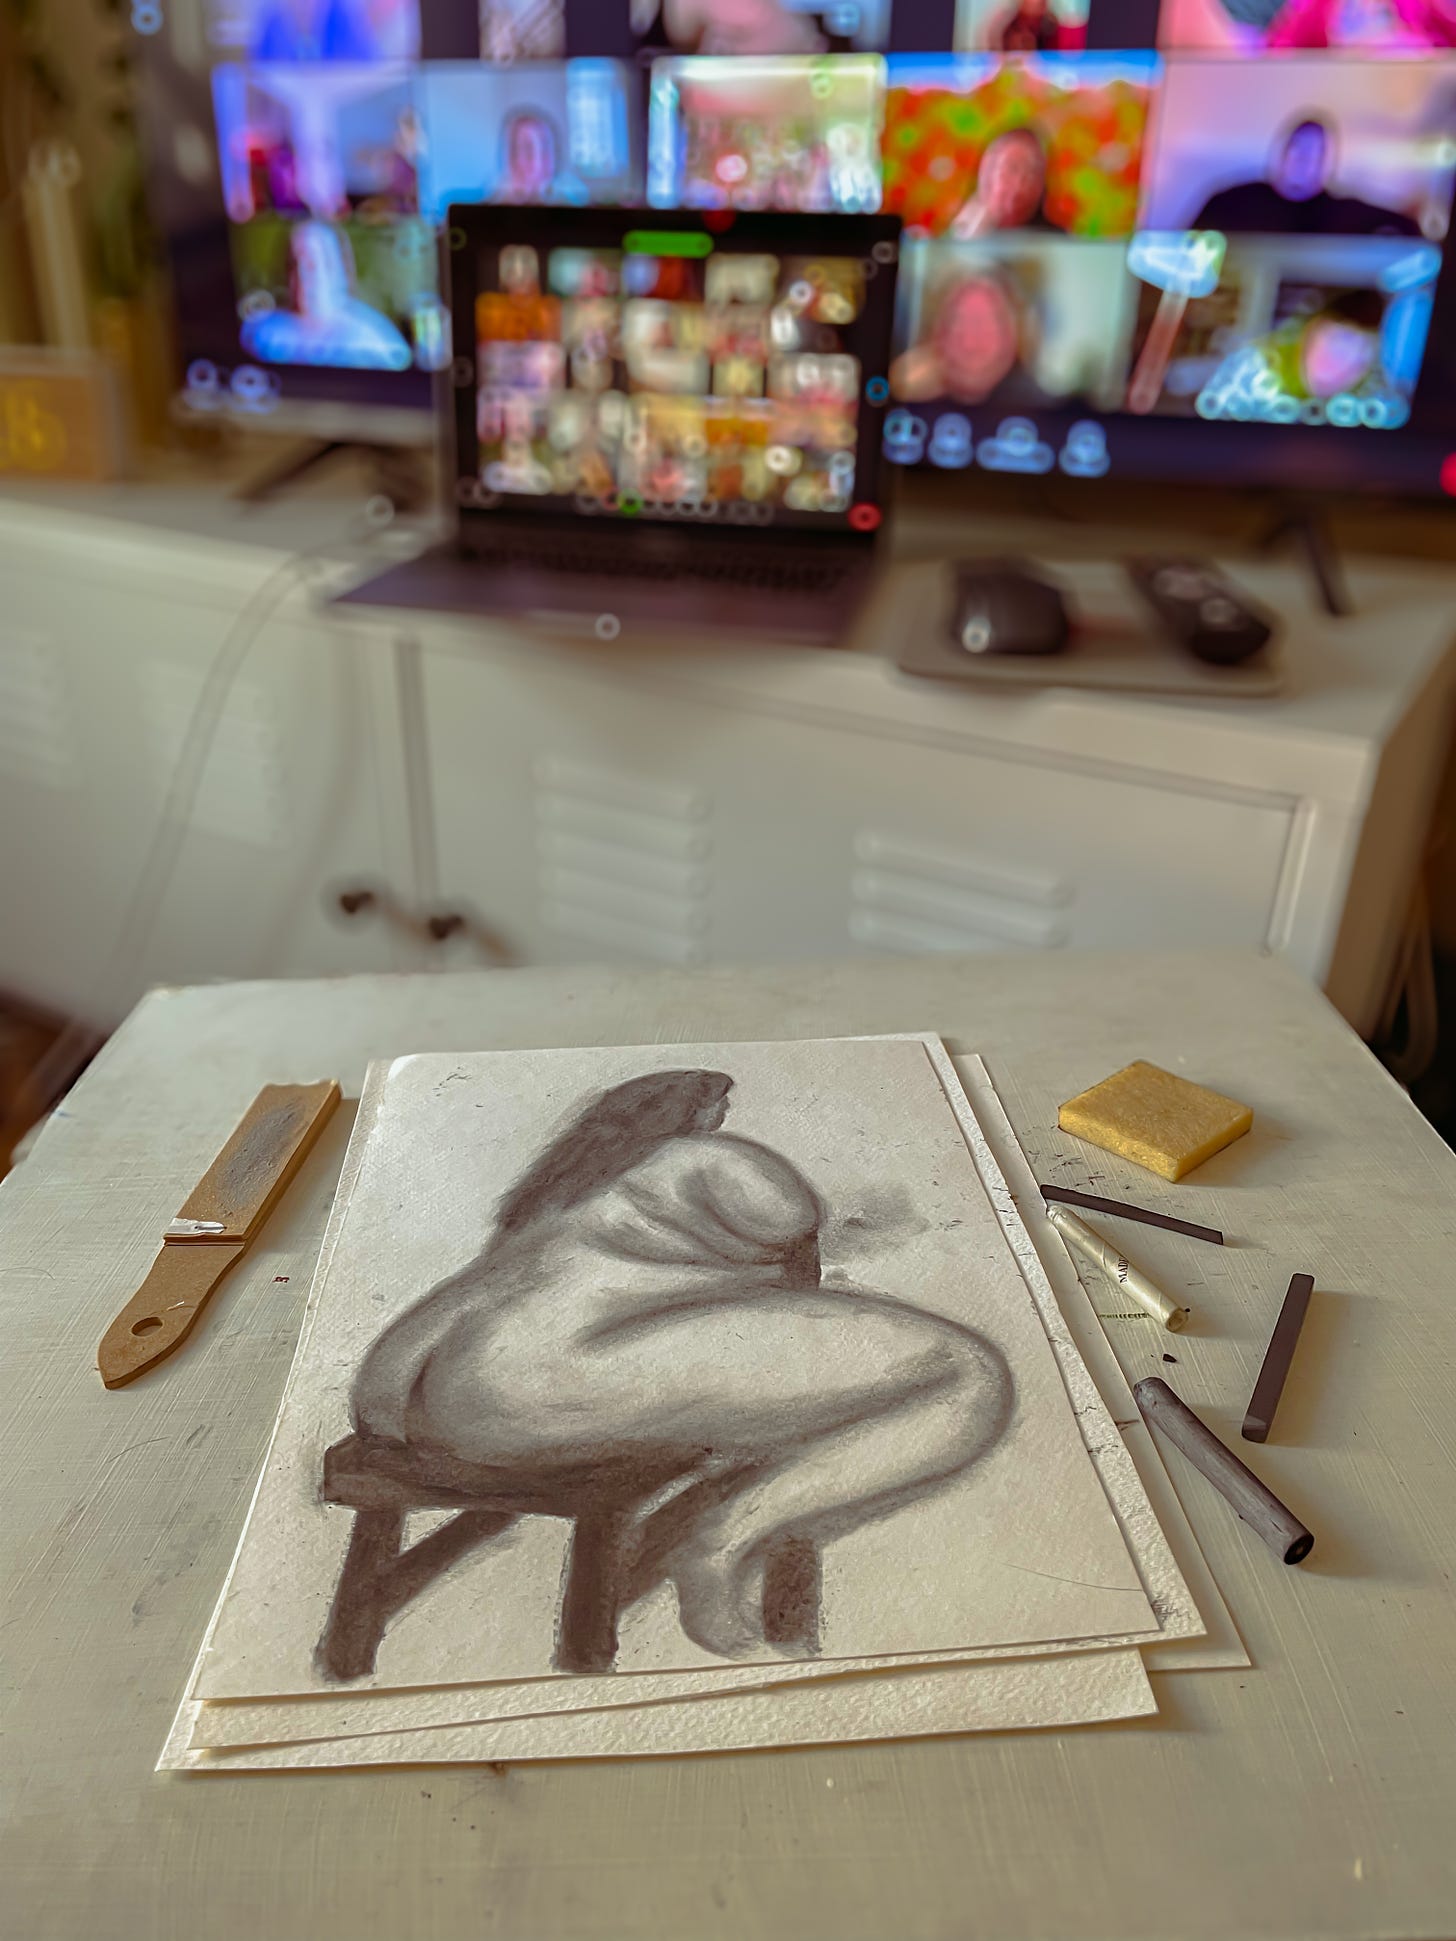 A charcoal drawing done during a lvirtual live drawing class called Fat Life Drawing, of a fat nude model with a blurred TV screen in the background showing a live zoom of other participants in the class.